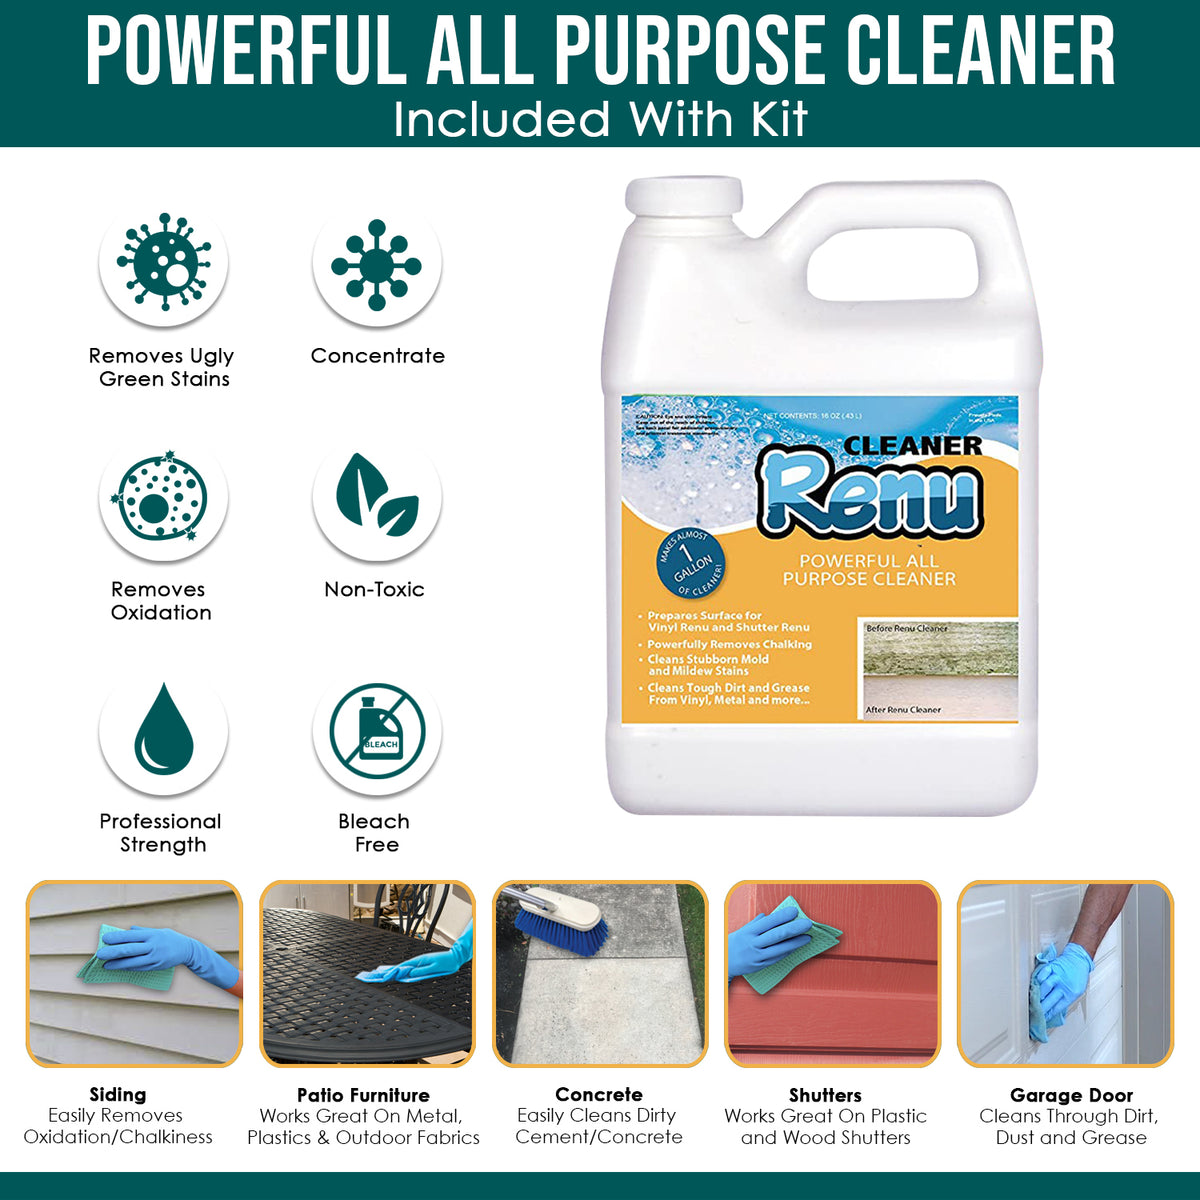 Powerful all purpose cleaner